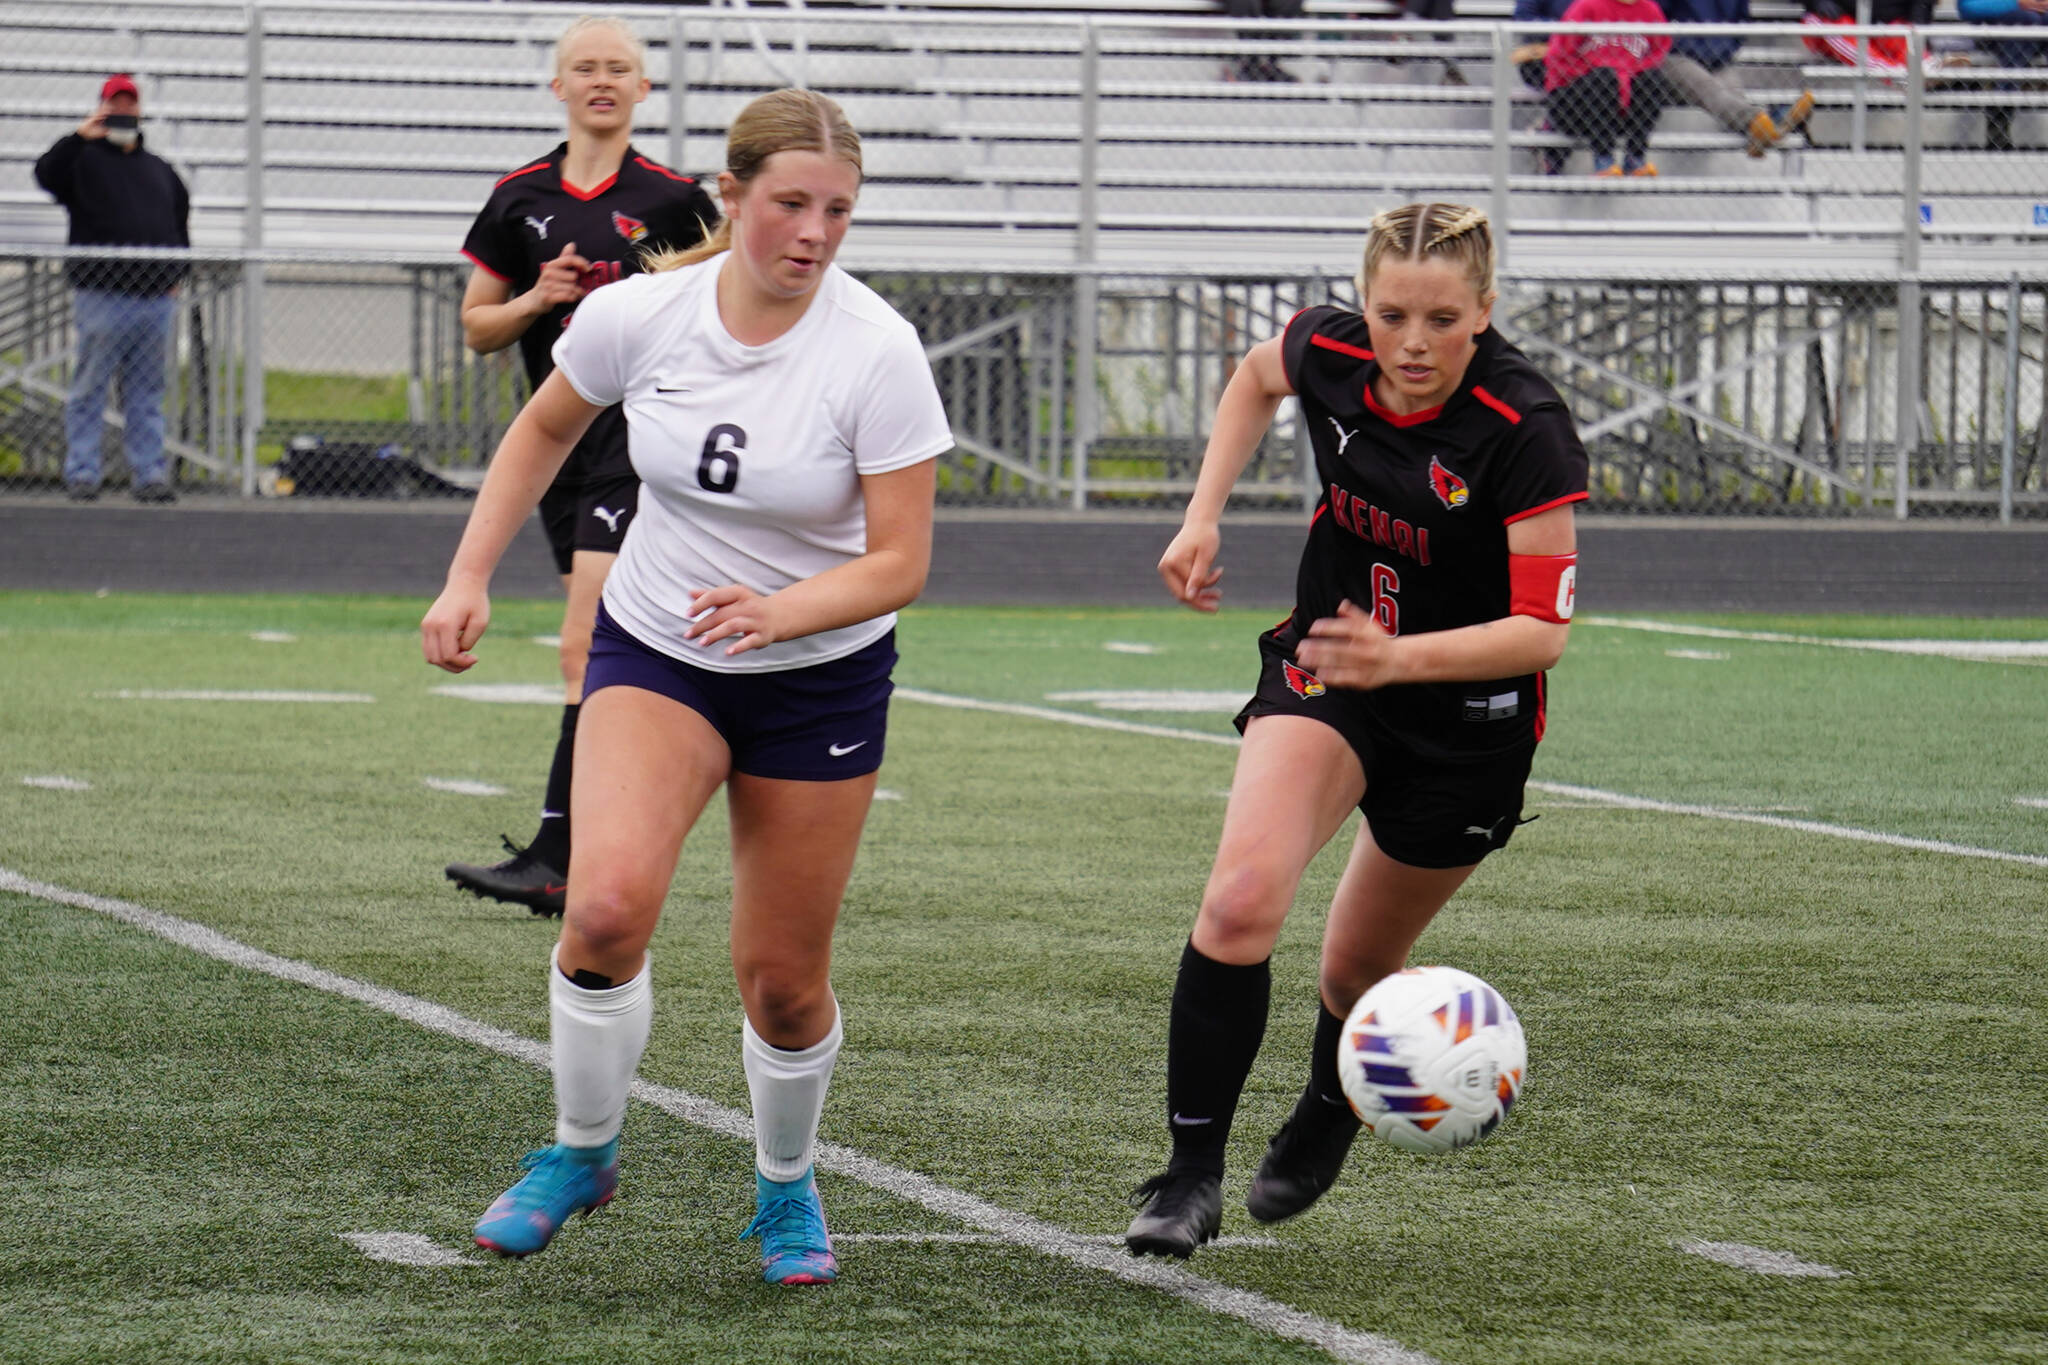 Soldotna’s Alexandra Lee and Kenai Central’s Kori Moore race after the ball during the Division II Soccer State Championship on Saturday, May 27, 2023, at West Anchorage High School in Anchorage, Alaska. (Jake Dye/Peninsula Clarion)